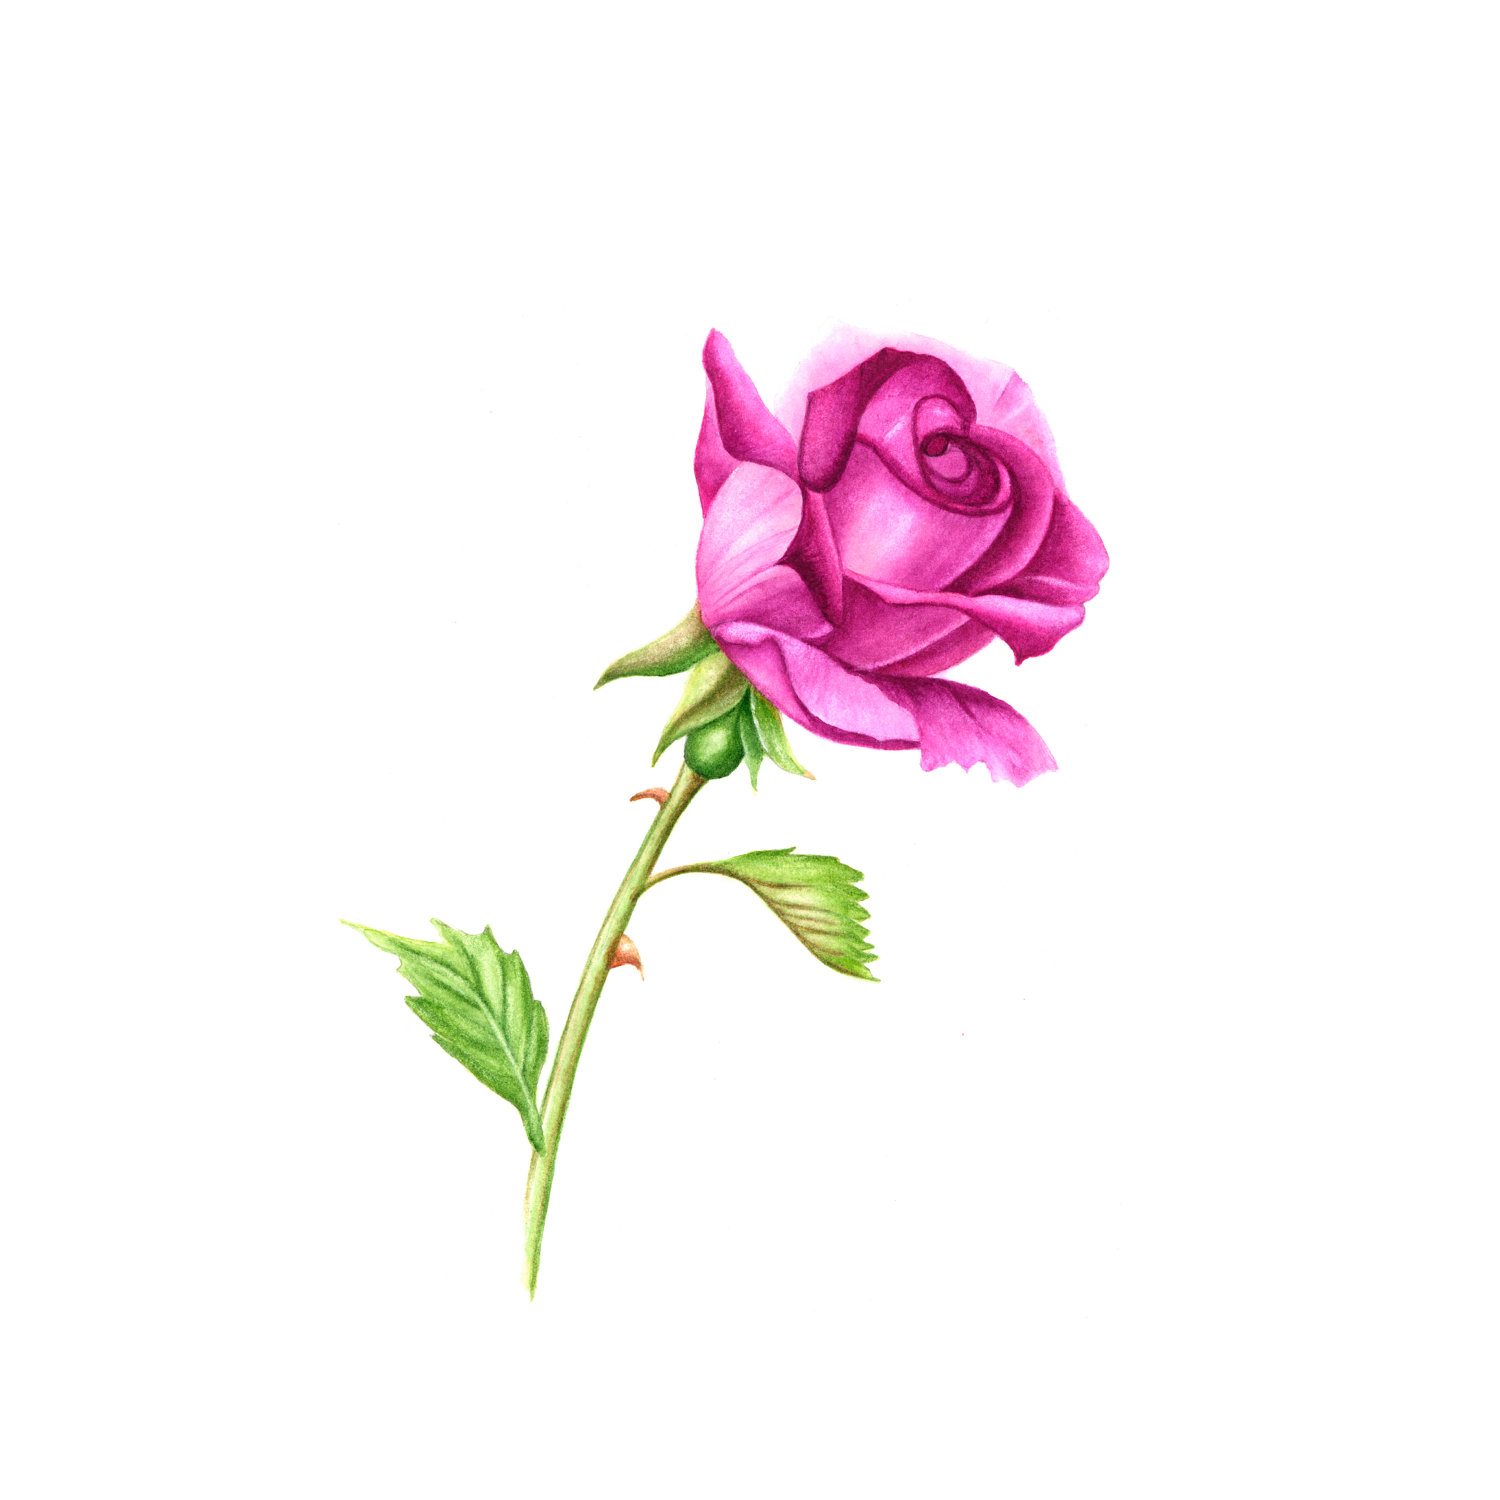 Rose Outline With Stem - ClipArt Best